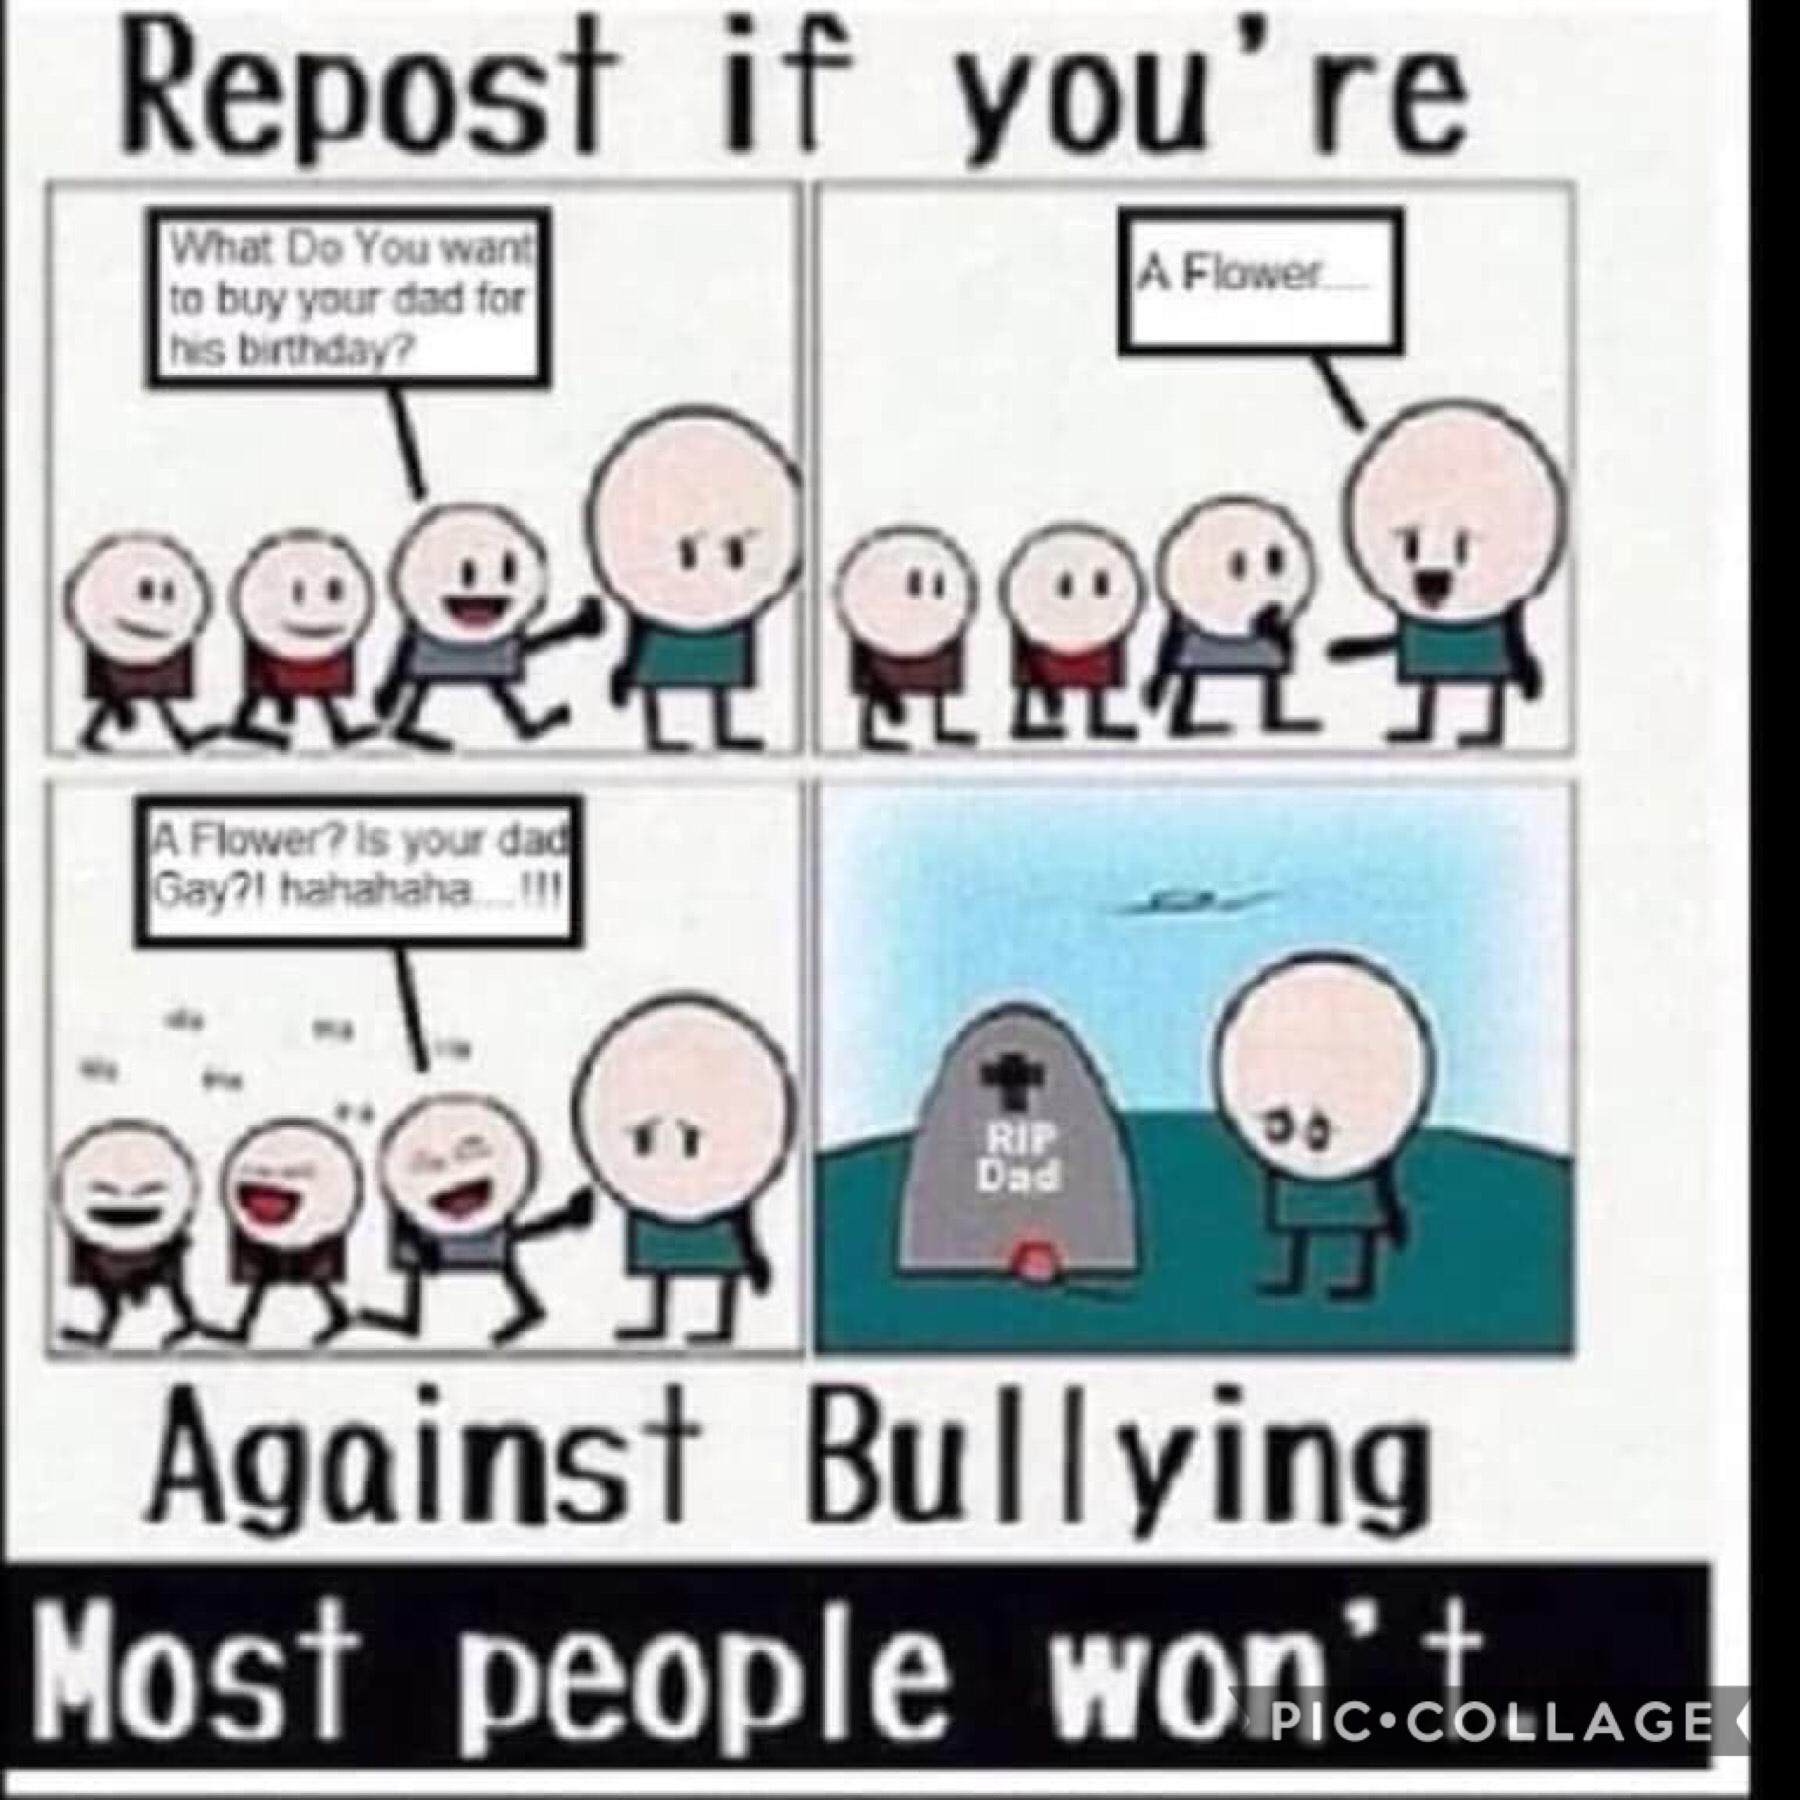 Are you against Bullying?